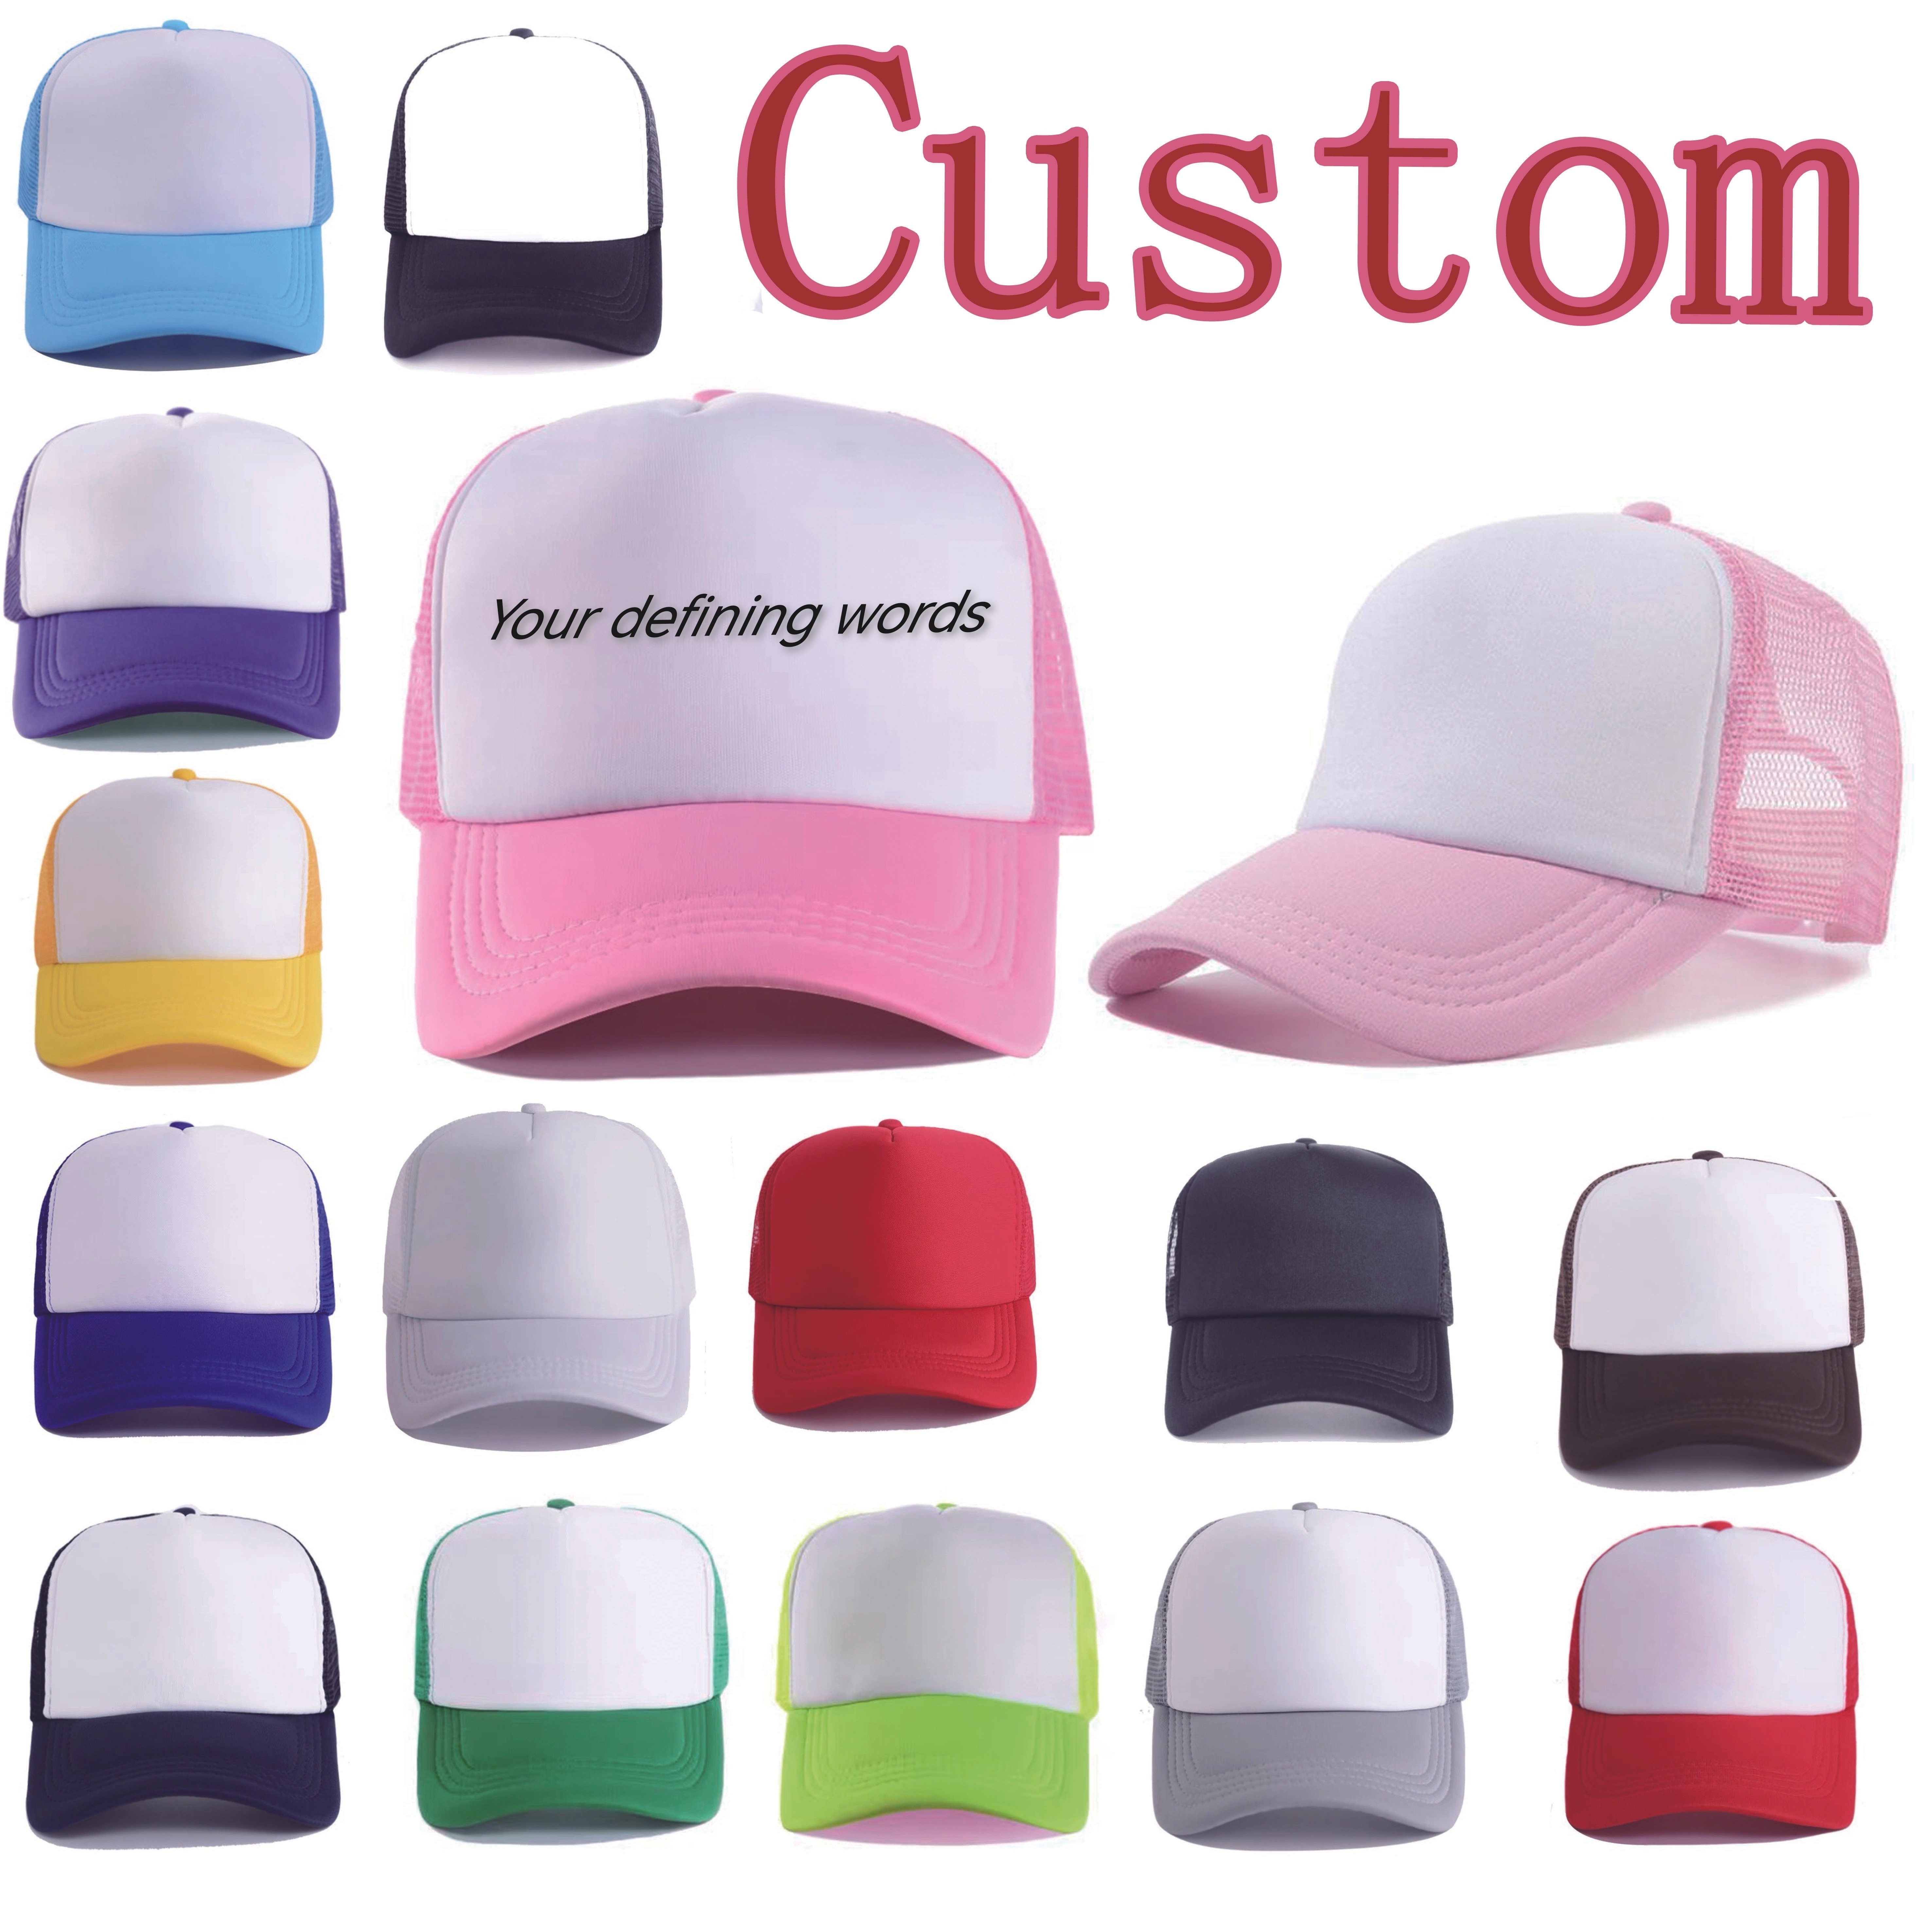 

Customized Logo Baseball Cap Personalized Stylish Versatile Dad Hat Outdoor Adjustable Sun Protection Sports Hats For Women Men